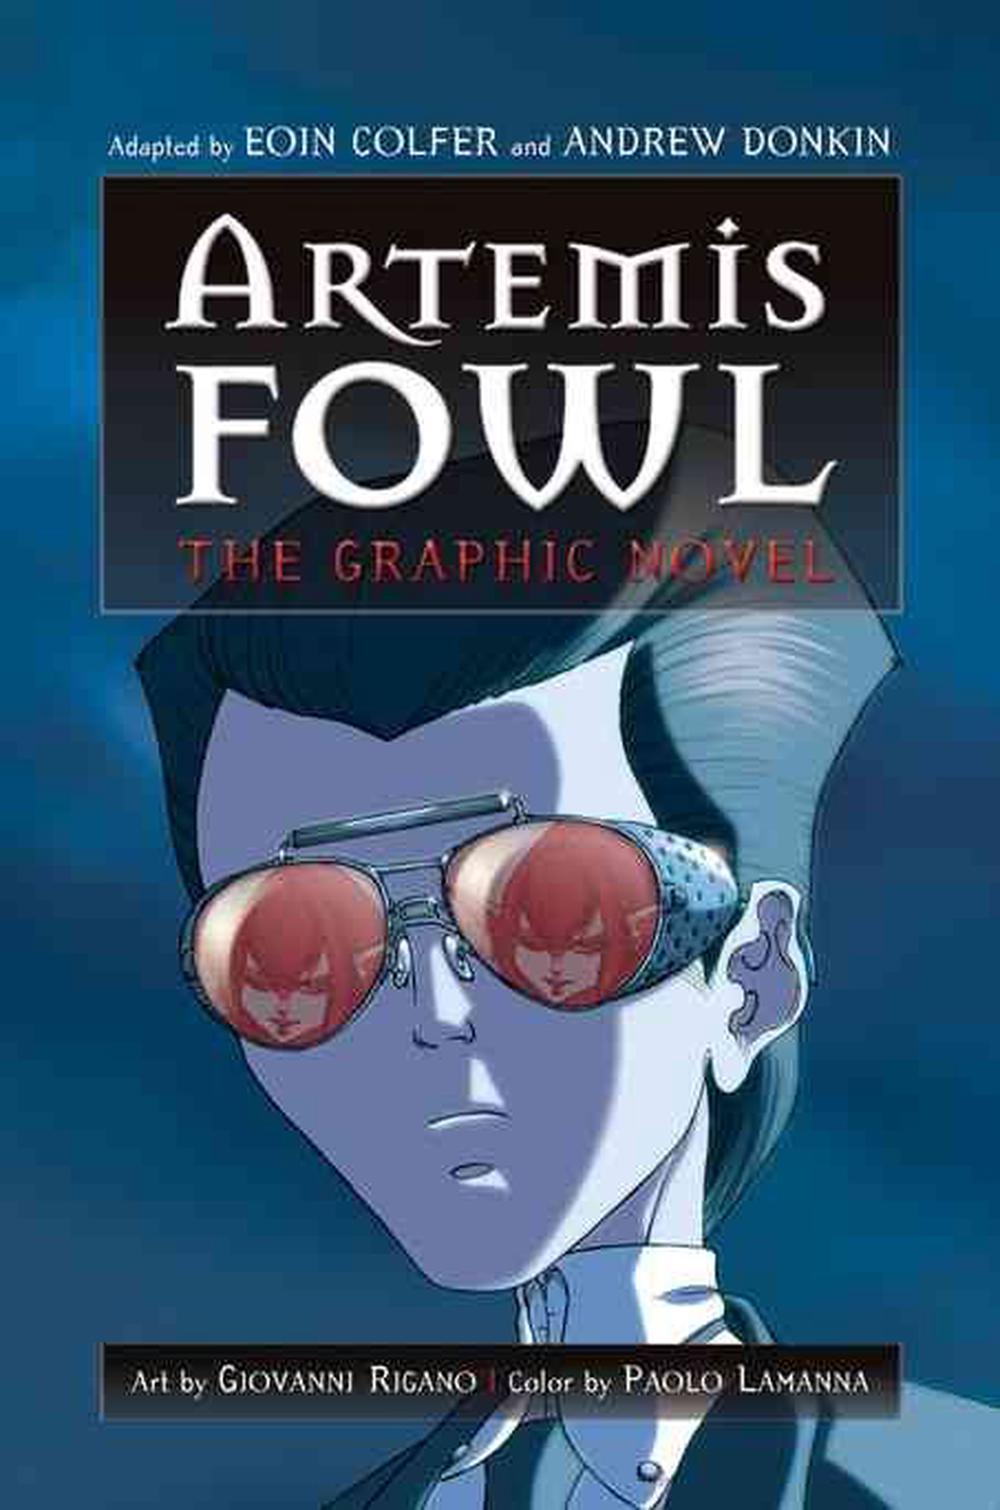 artemis fowl by eoin colfer